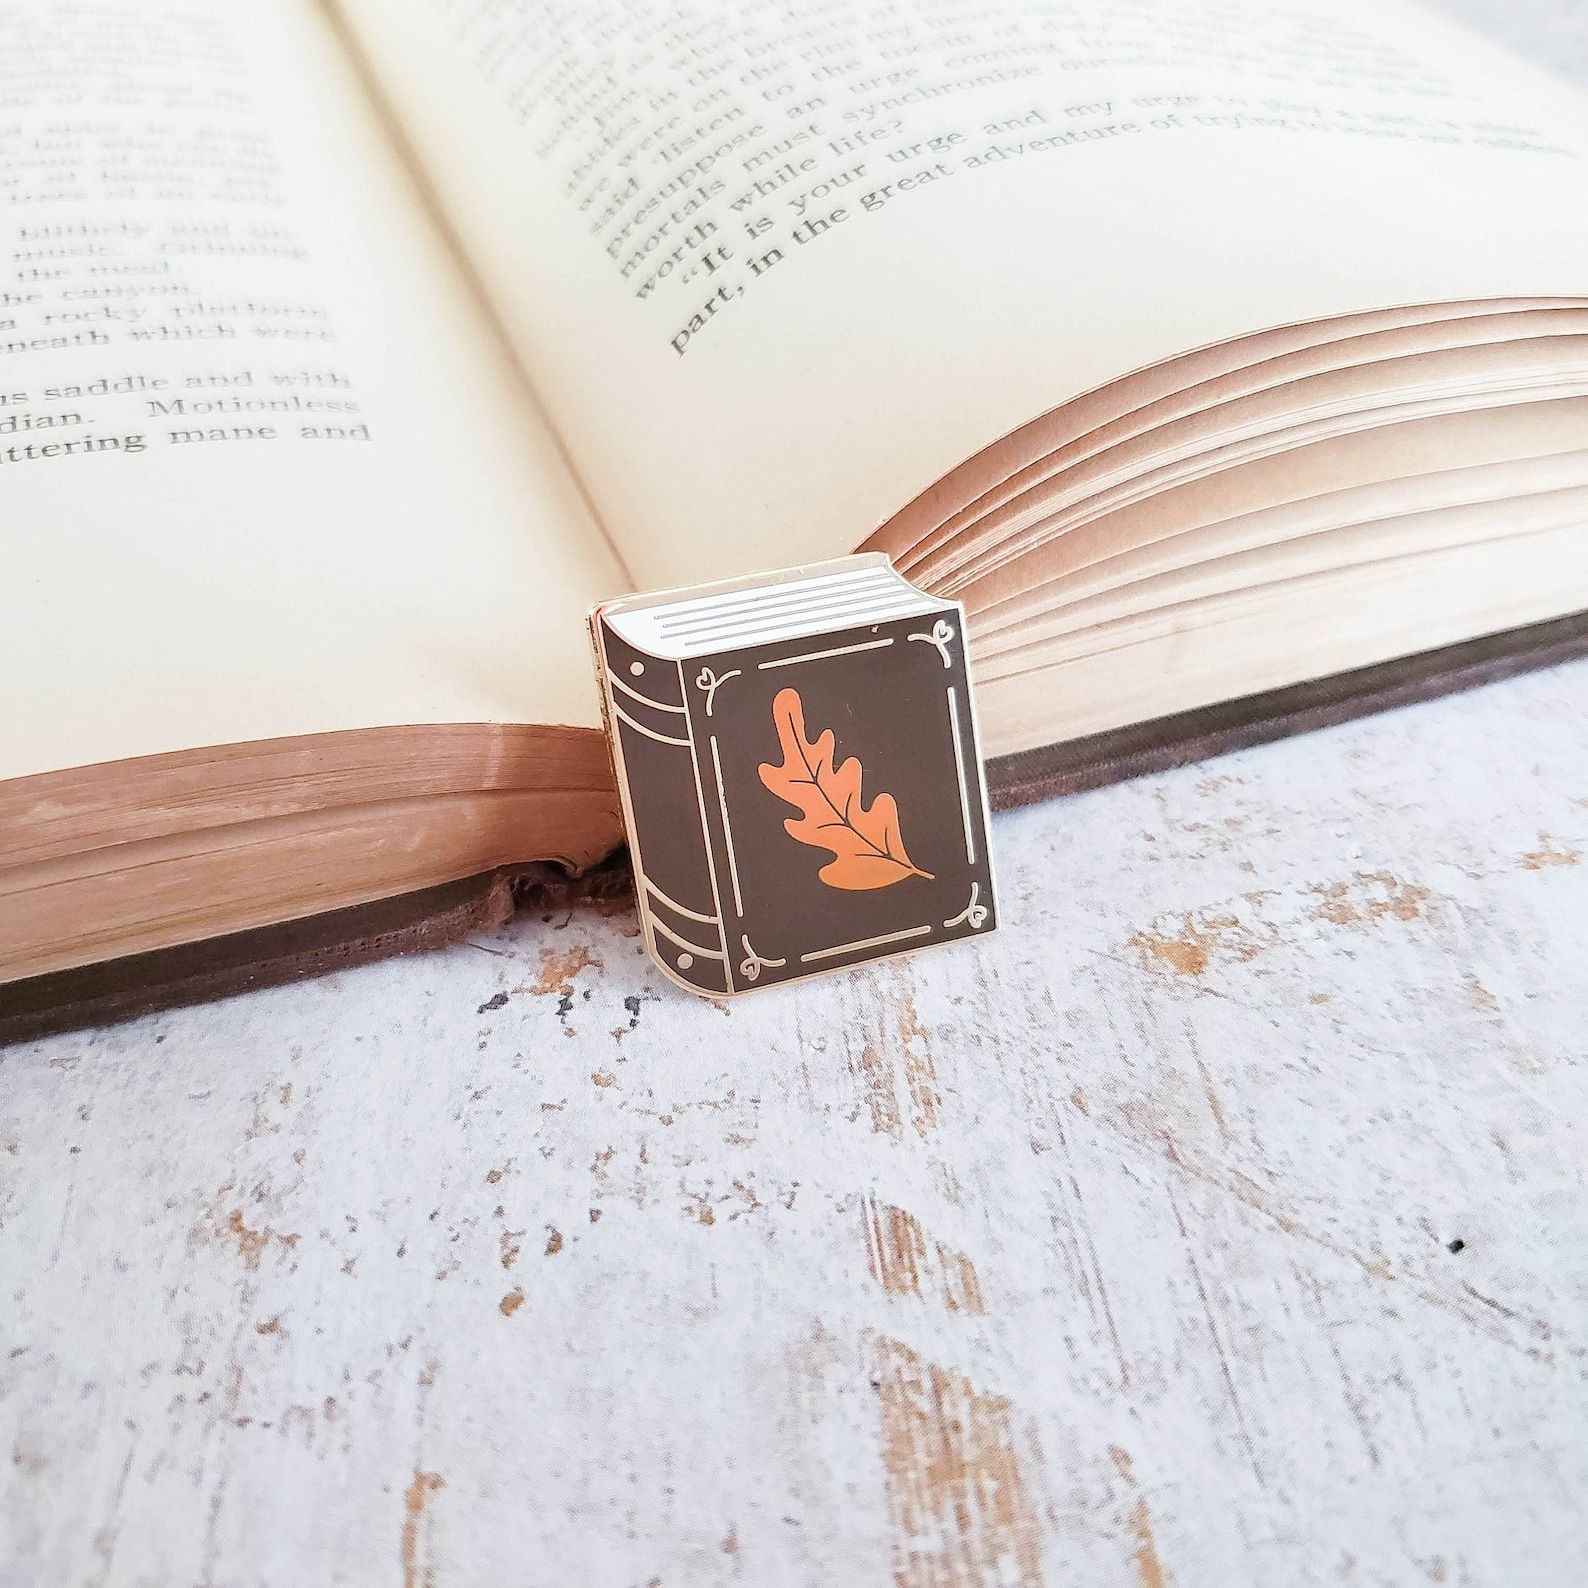 Enamel pin in the shape of a brown book with an orange leaf on it